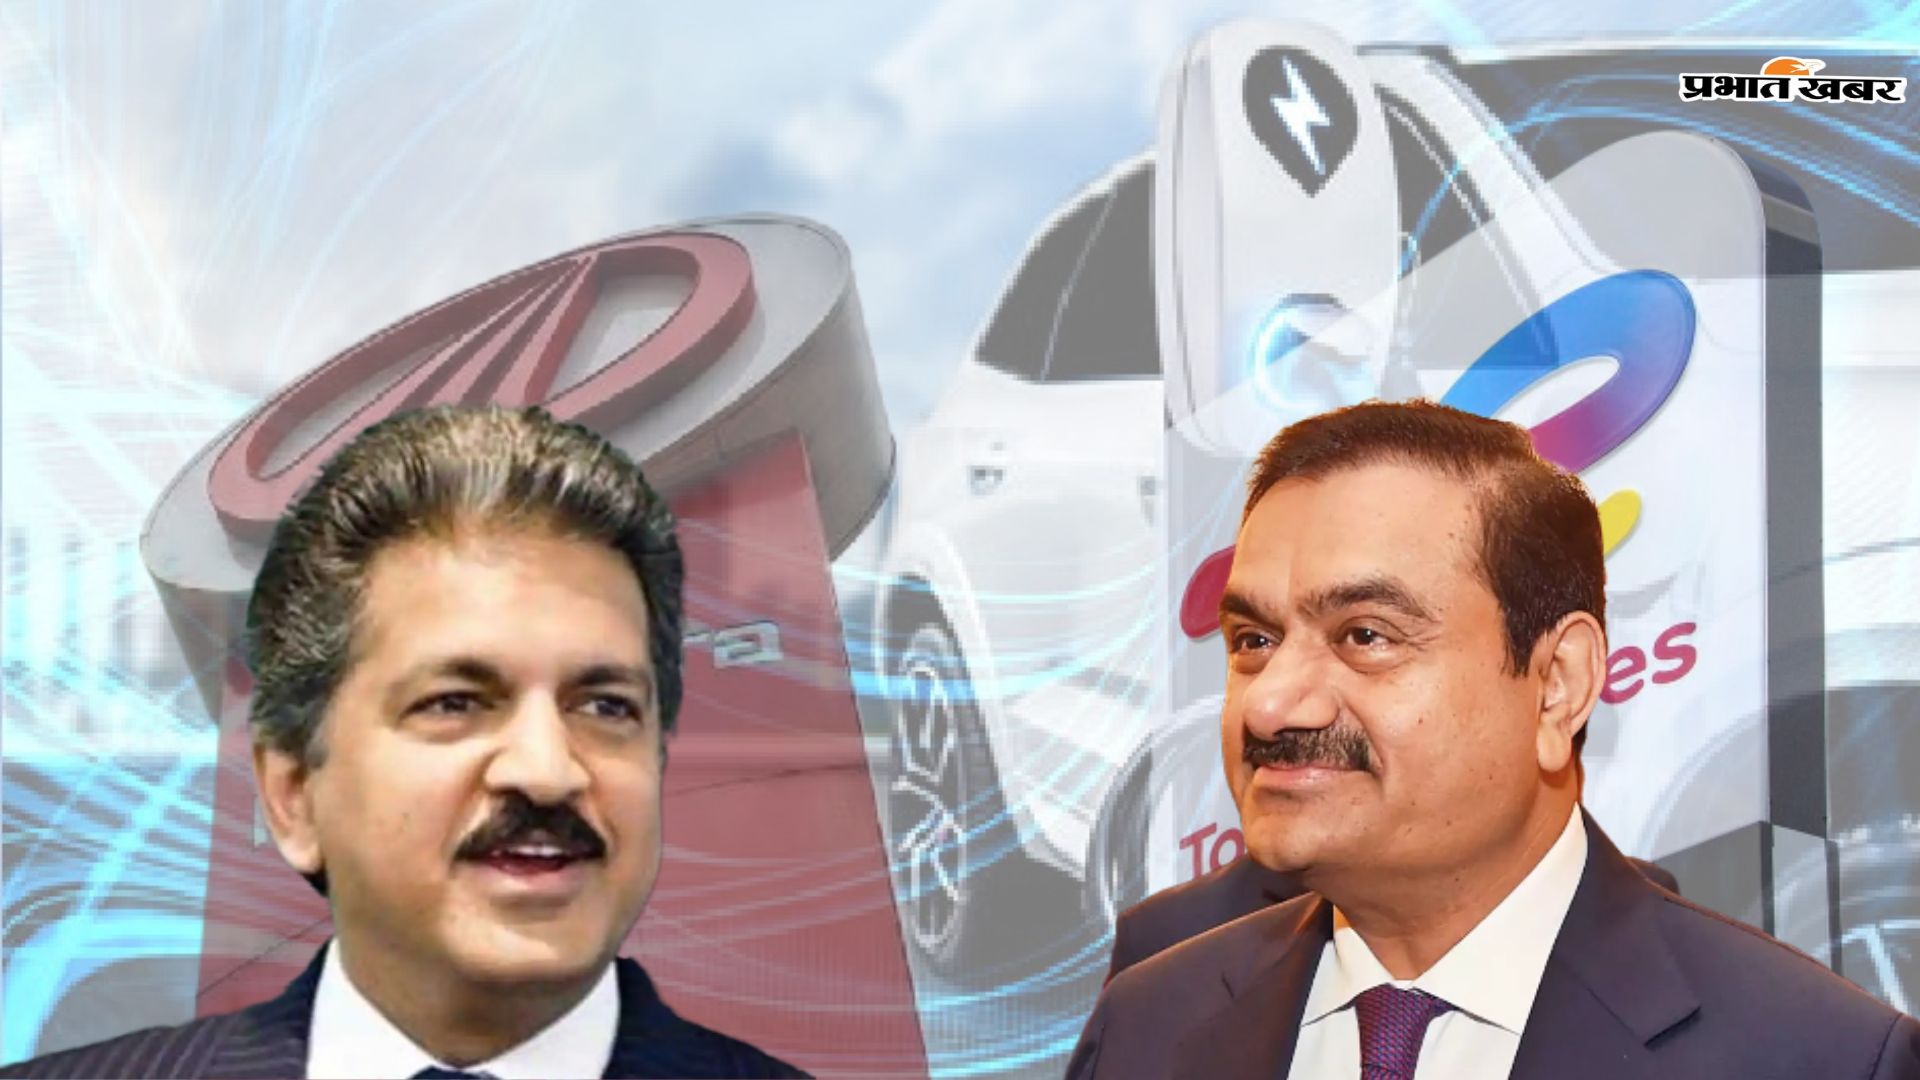 Mahindra and Adani Total Energy will install EV charging station